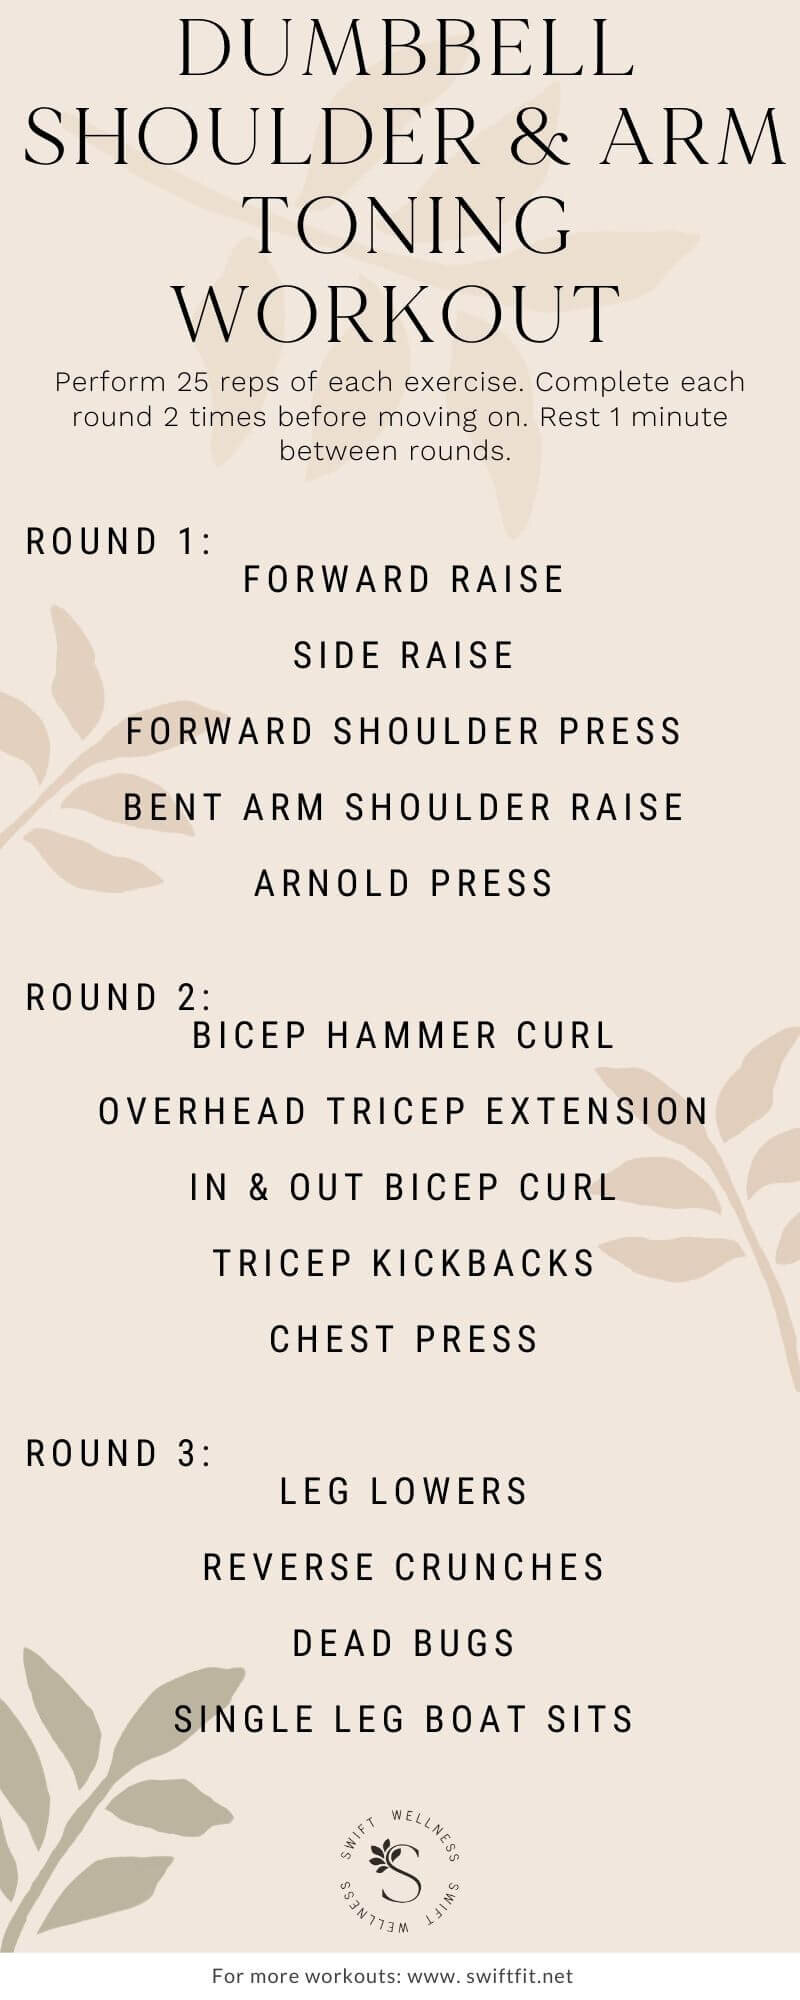 30 Minute Dumbbell Arm and Shoulder Workout To Strengthen Your Upper Body